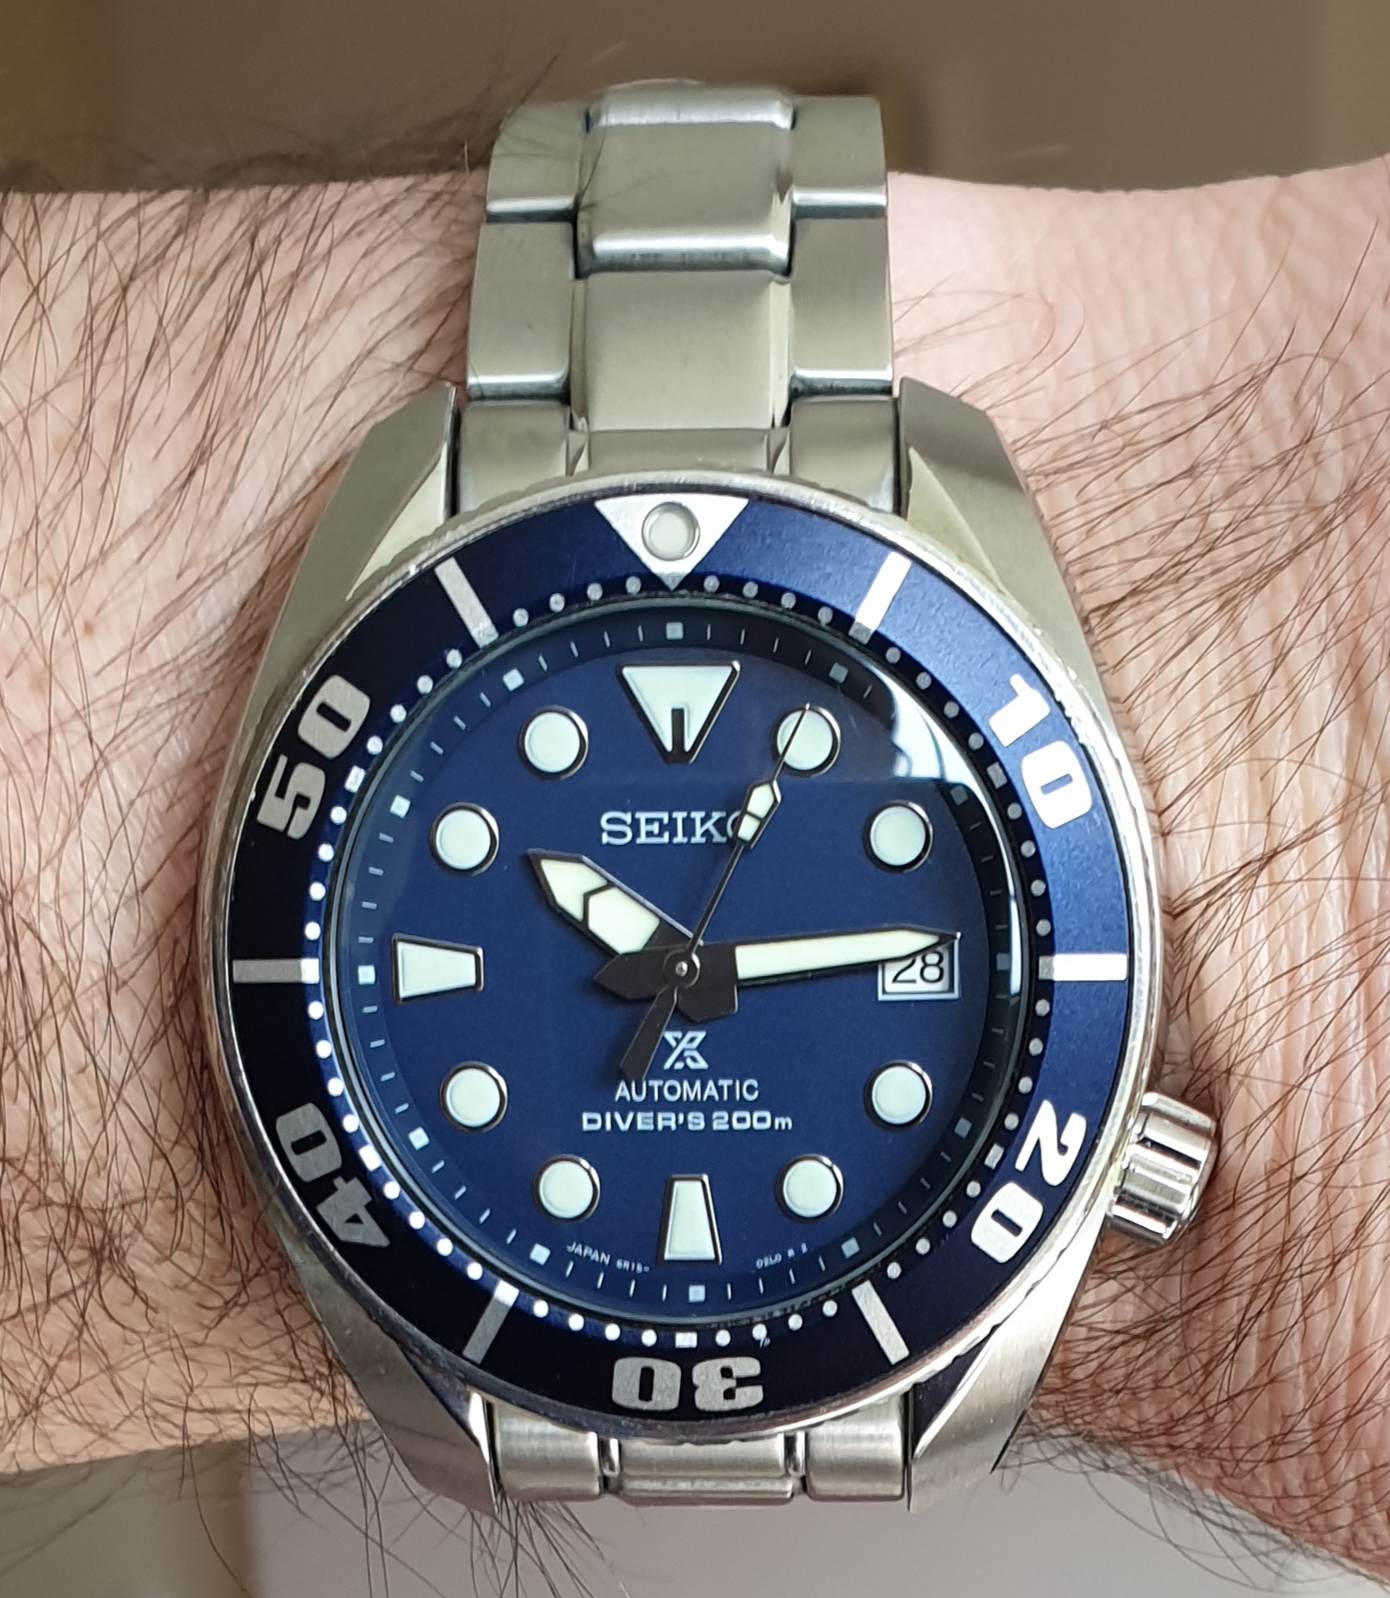 SEIKO SUMO SBDC033 BLUMO FOR SALE WITH EXTRA MARINEMASTER CLASP. |  WatchCharts